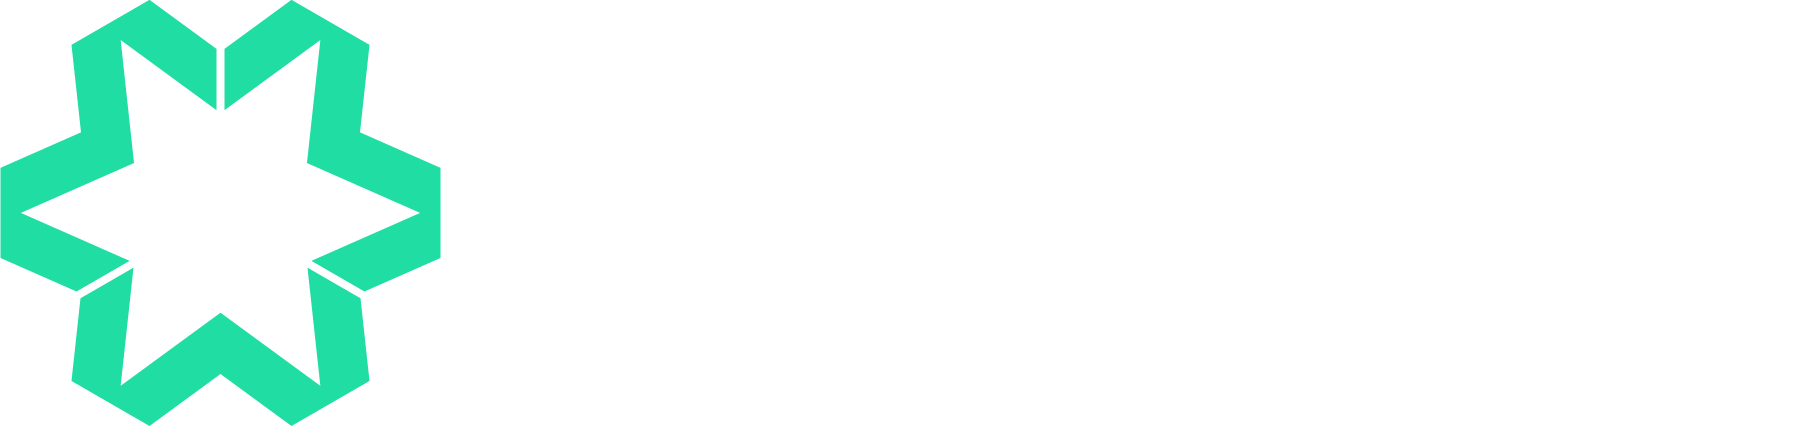 Manage My Website - Squarespace Specialists UK